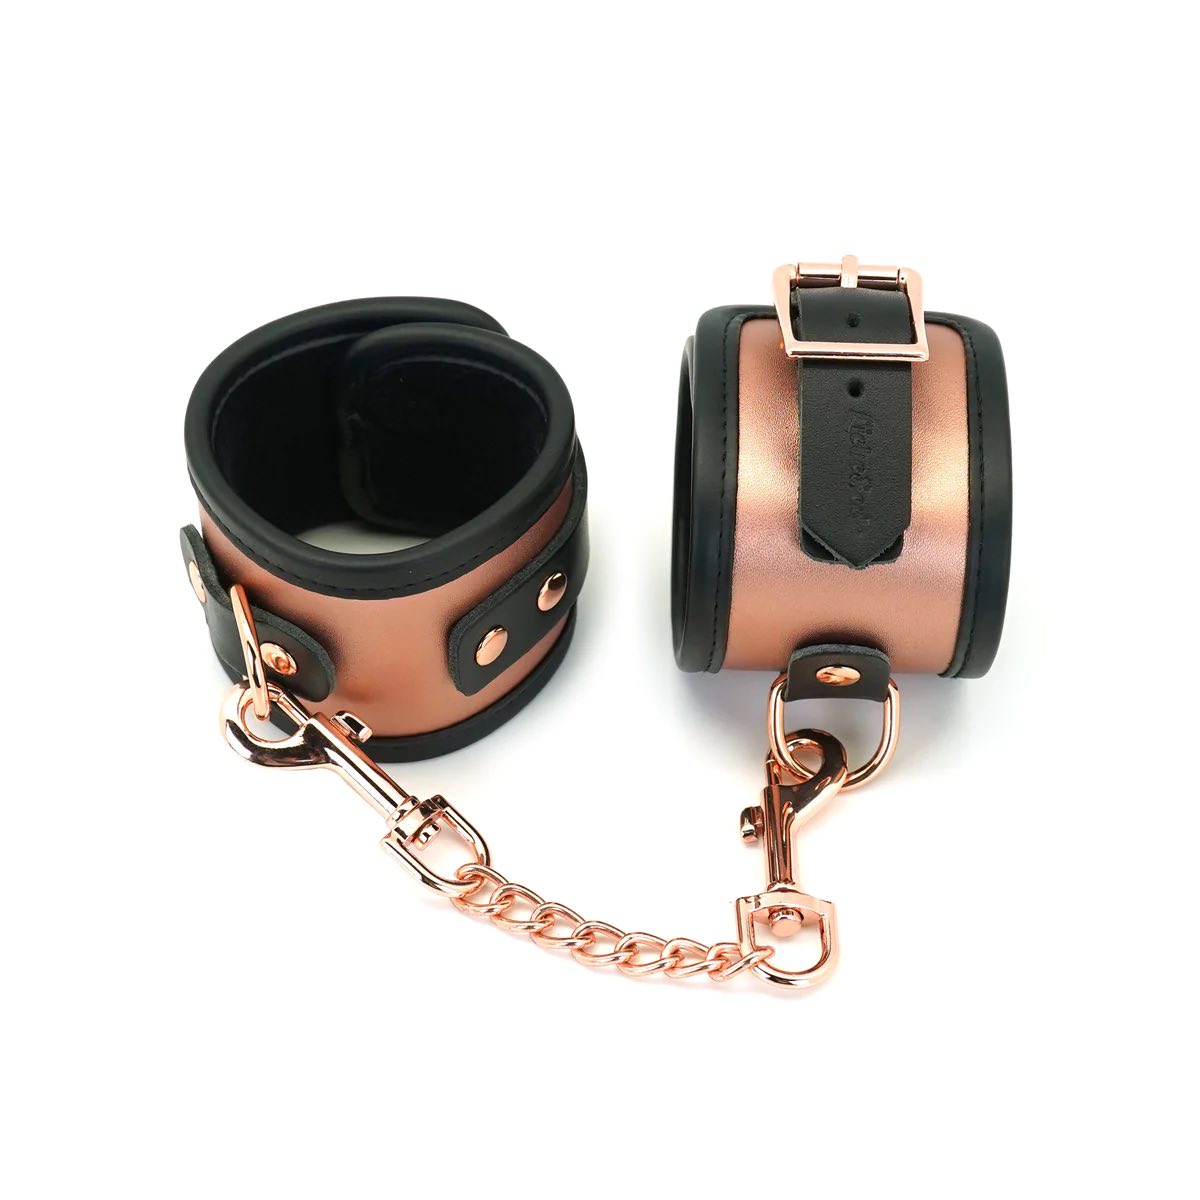 The Rose Gold Memory Leather Cuffs with Faux Fur LIning, buckled and closed with one cuff on its side with buckle at the top.